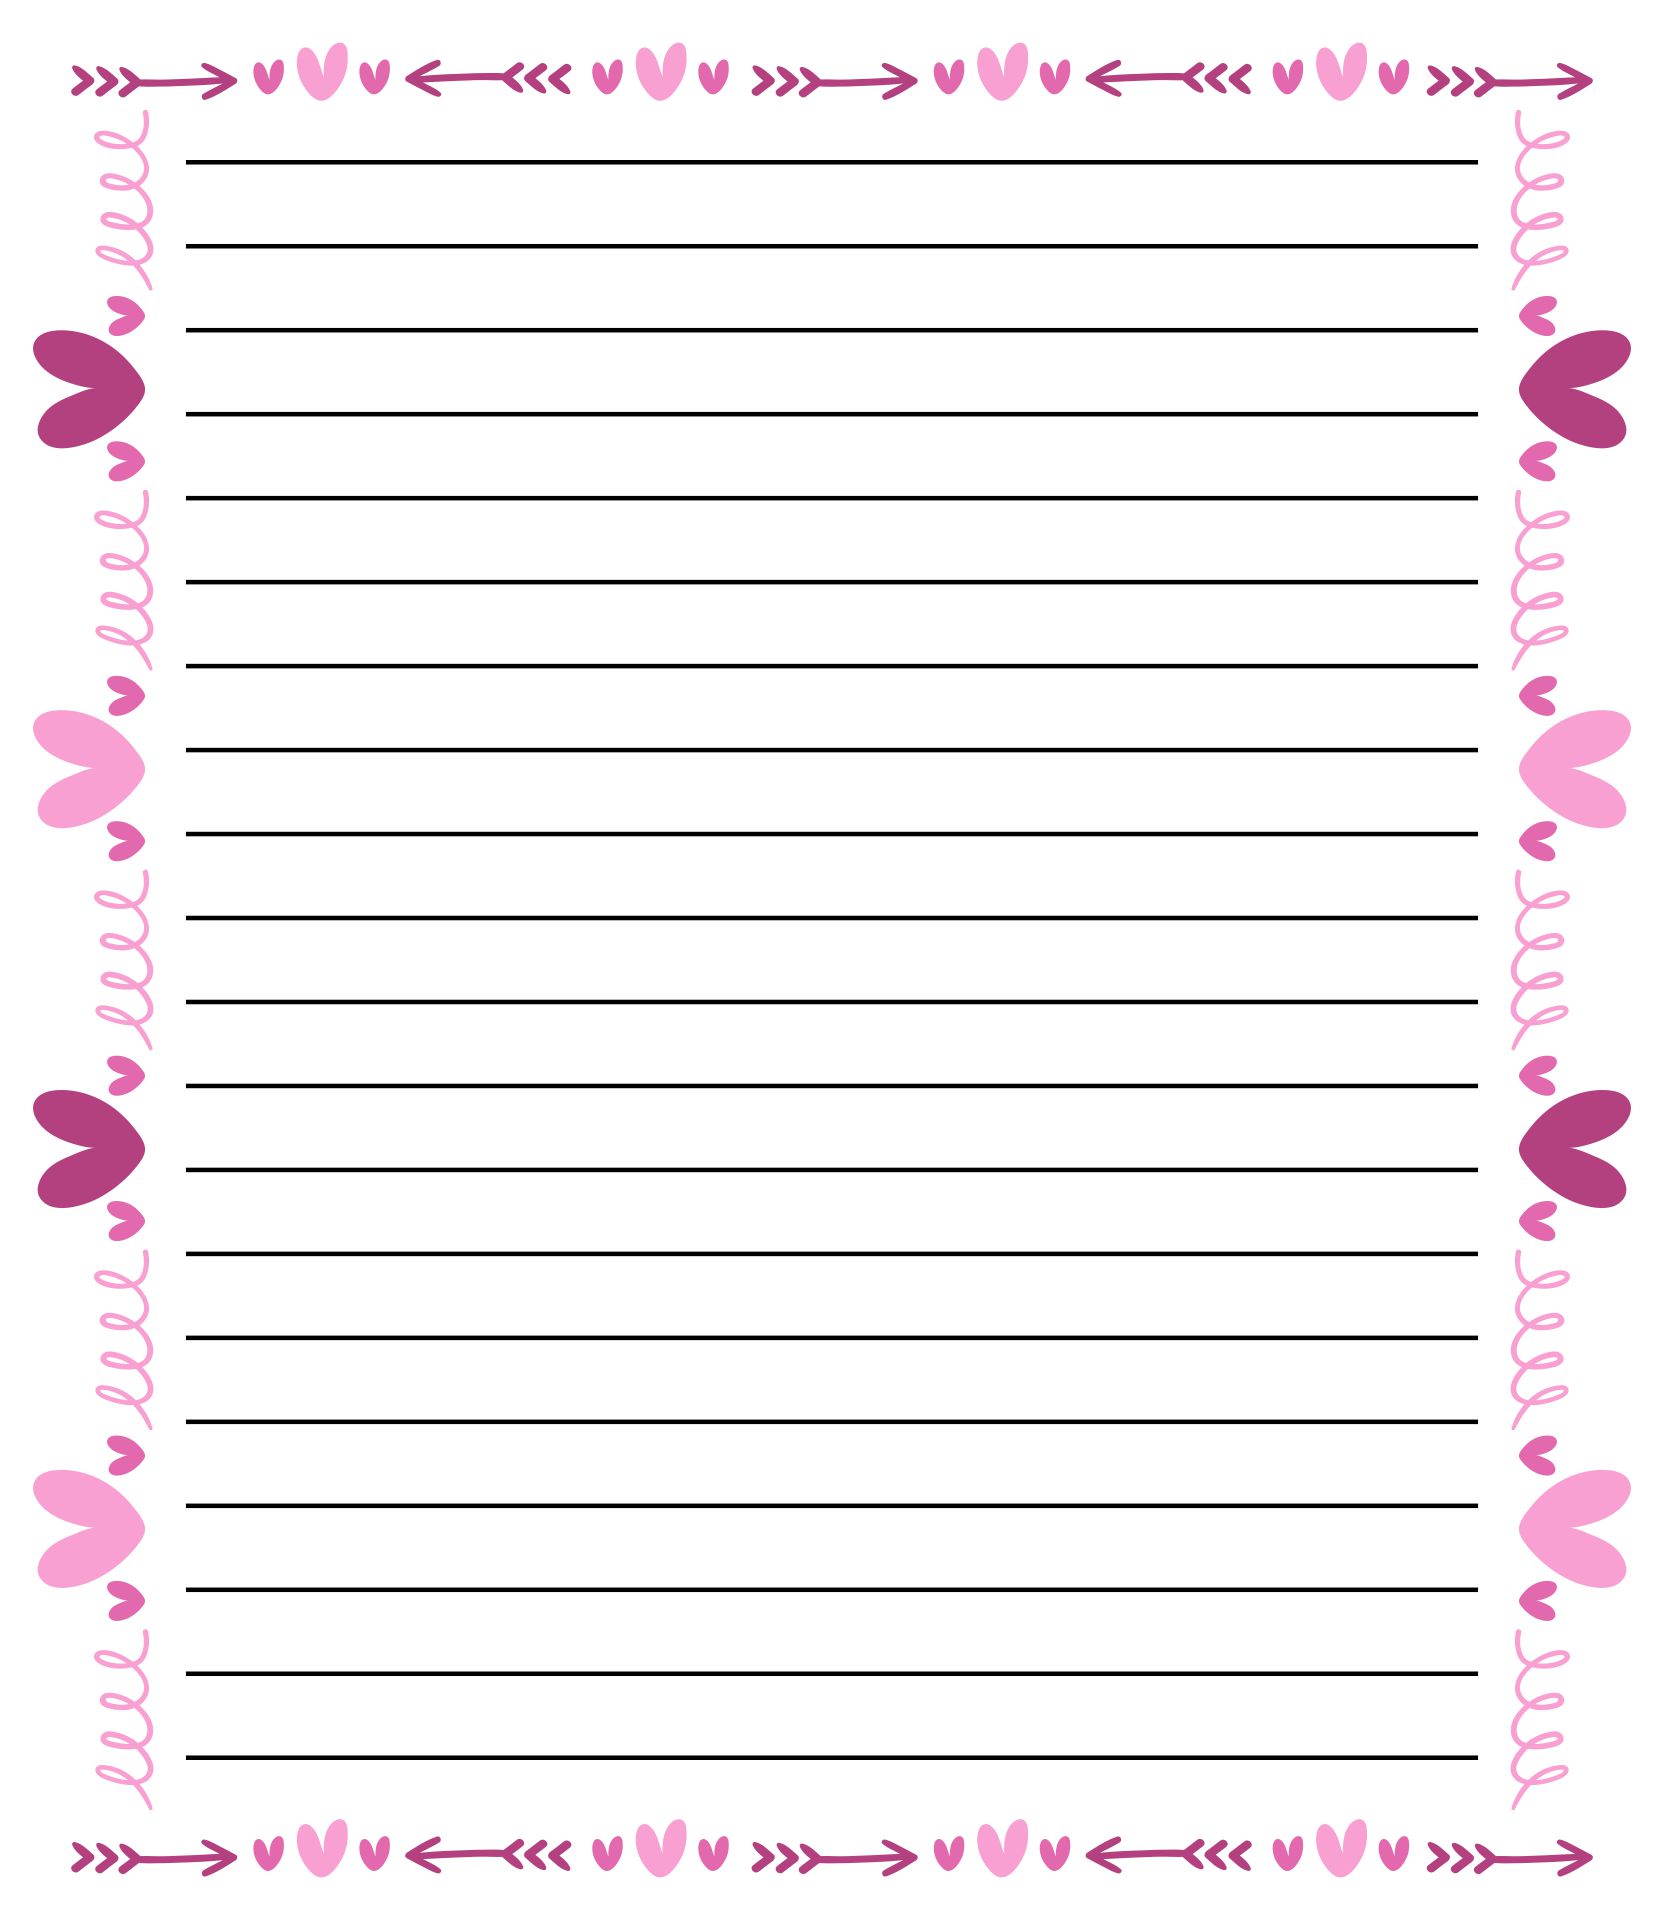 9-best-images-of-printable-lined-paper-with-borders-free-printable-lined-writing-paper